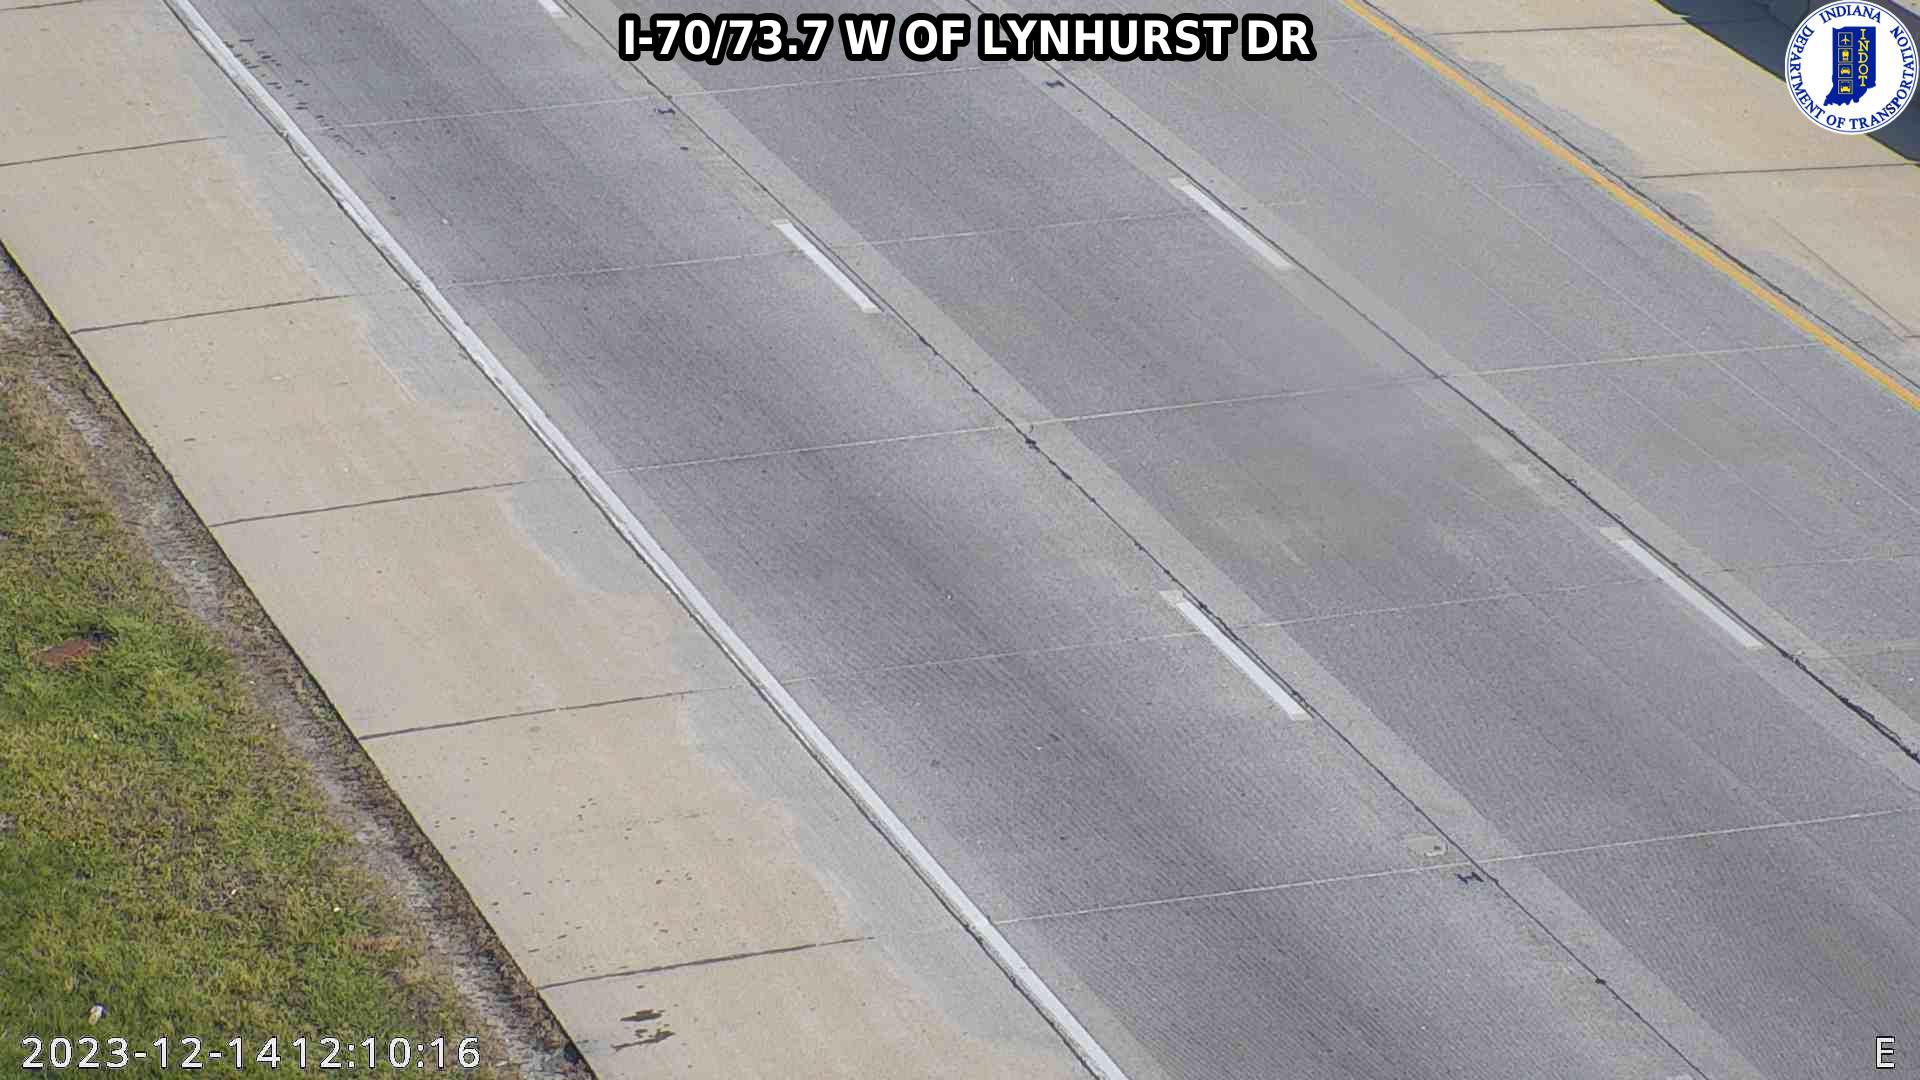 Traffic Cam Indianapolis: I-70: I-70/73.7 W OF LYNHURST DR Player